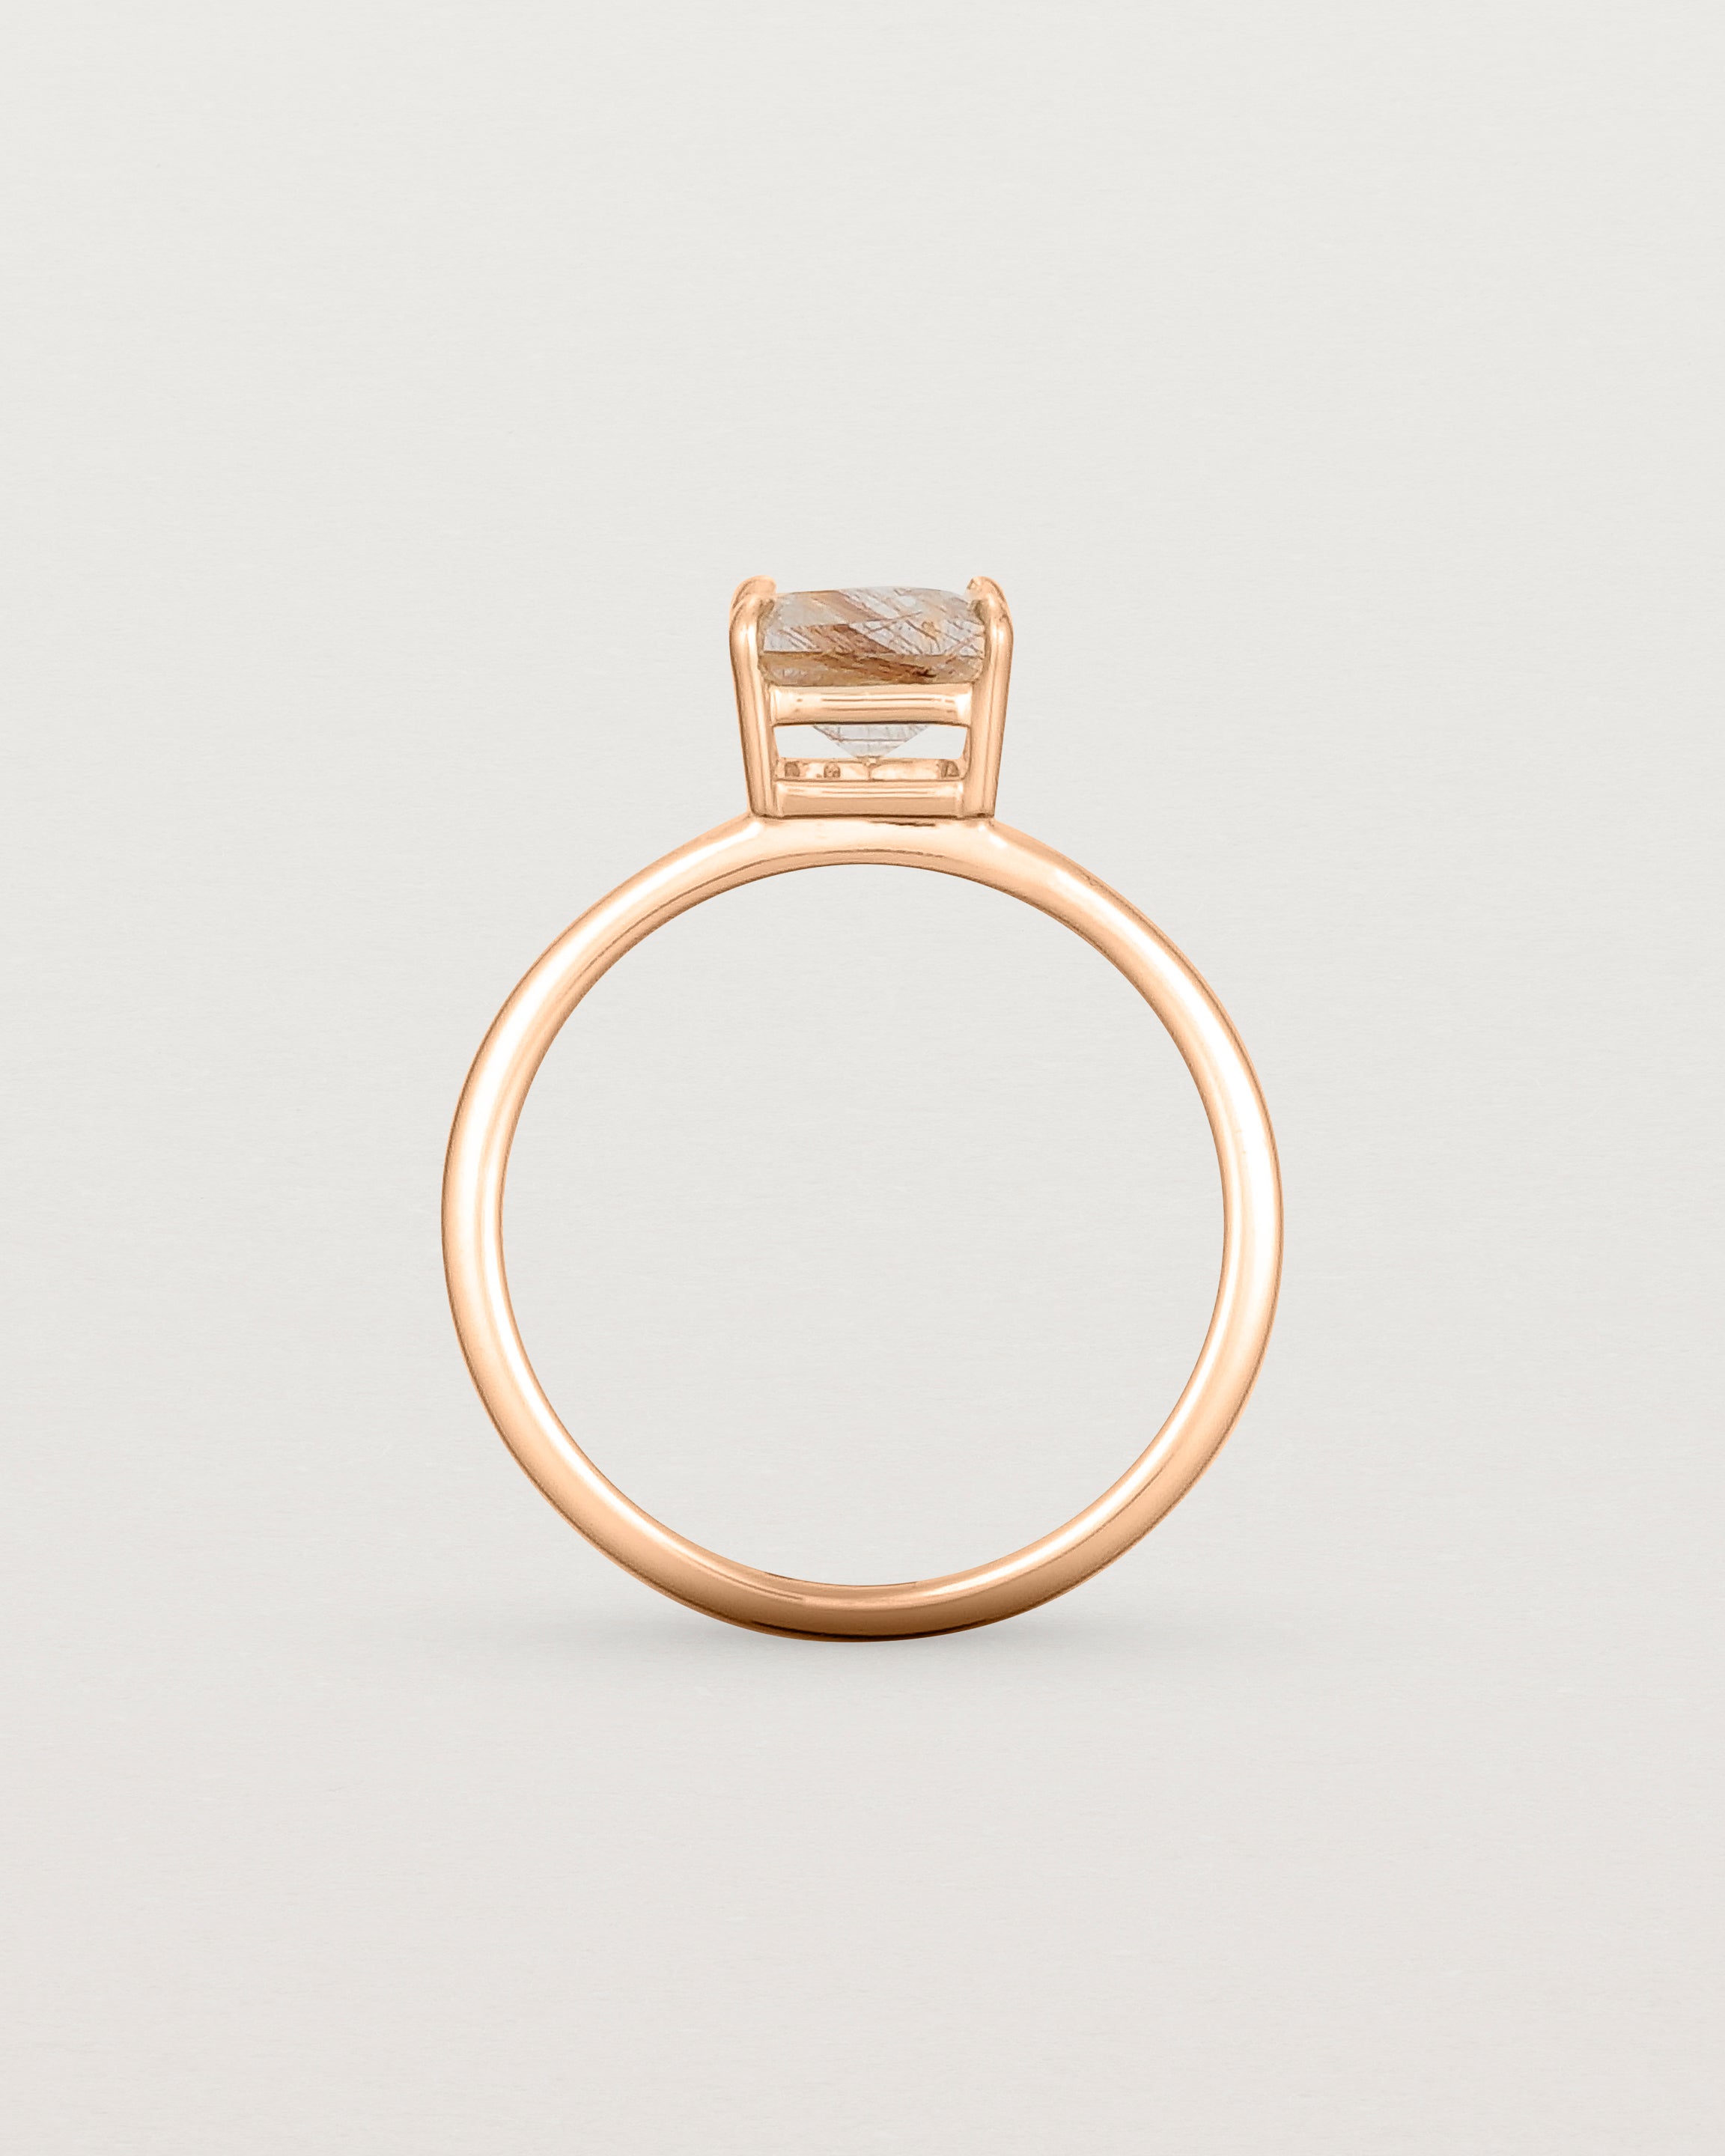 Standing view of the Una Emerald Solitaire | Rutilated Quartz | Rose Gold.